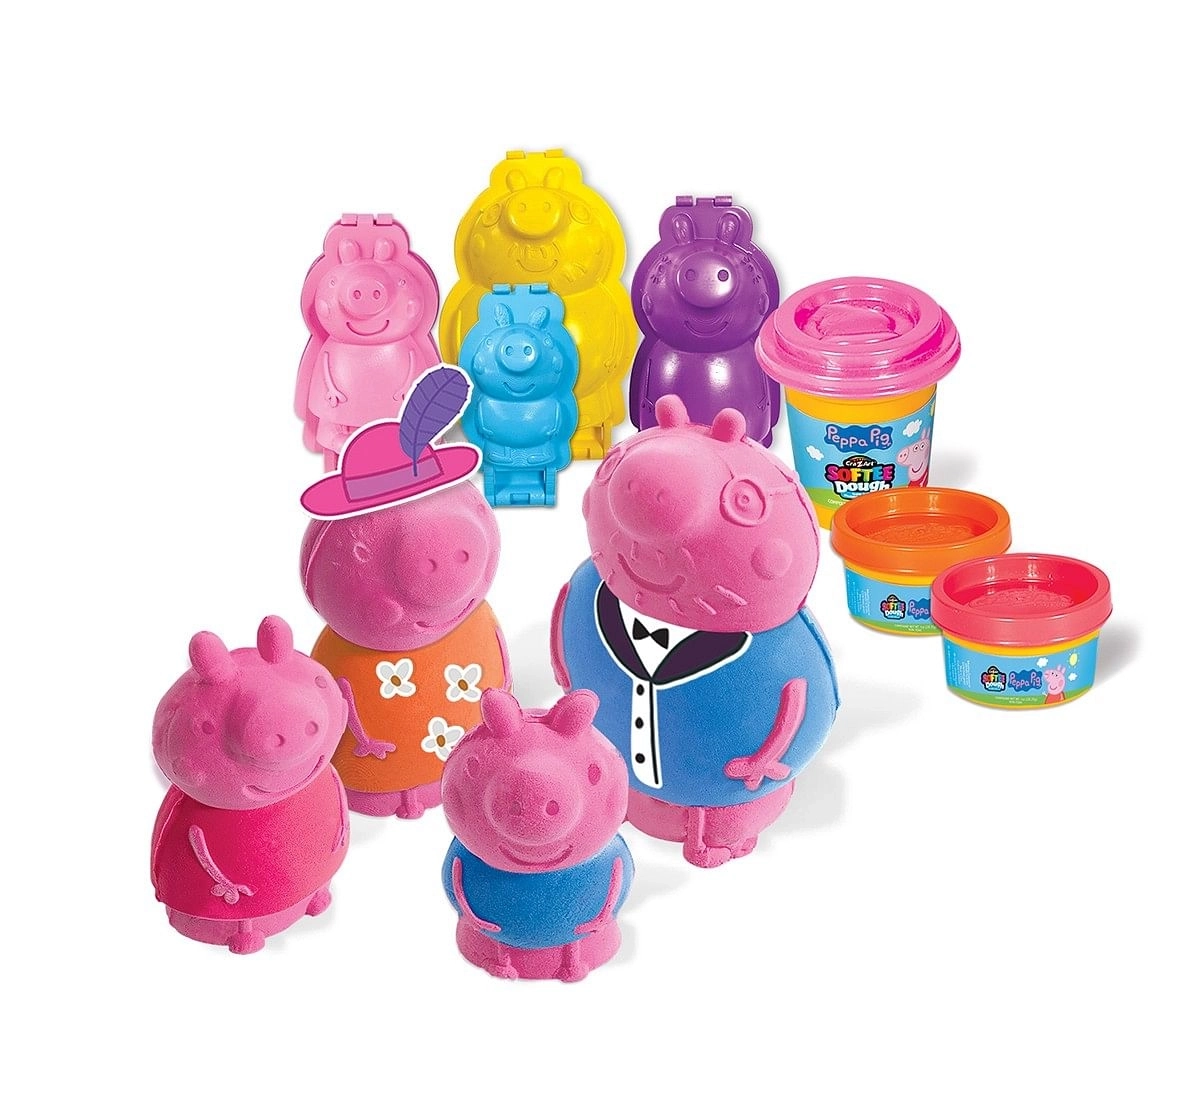 Peppa Pig Softee Dough Large Figure Maker Clay & dough for Kids age 3Y+ 